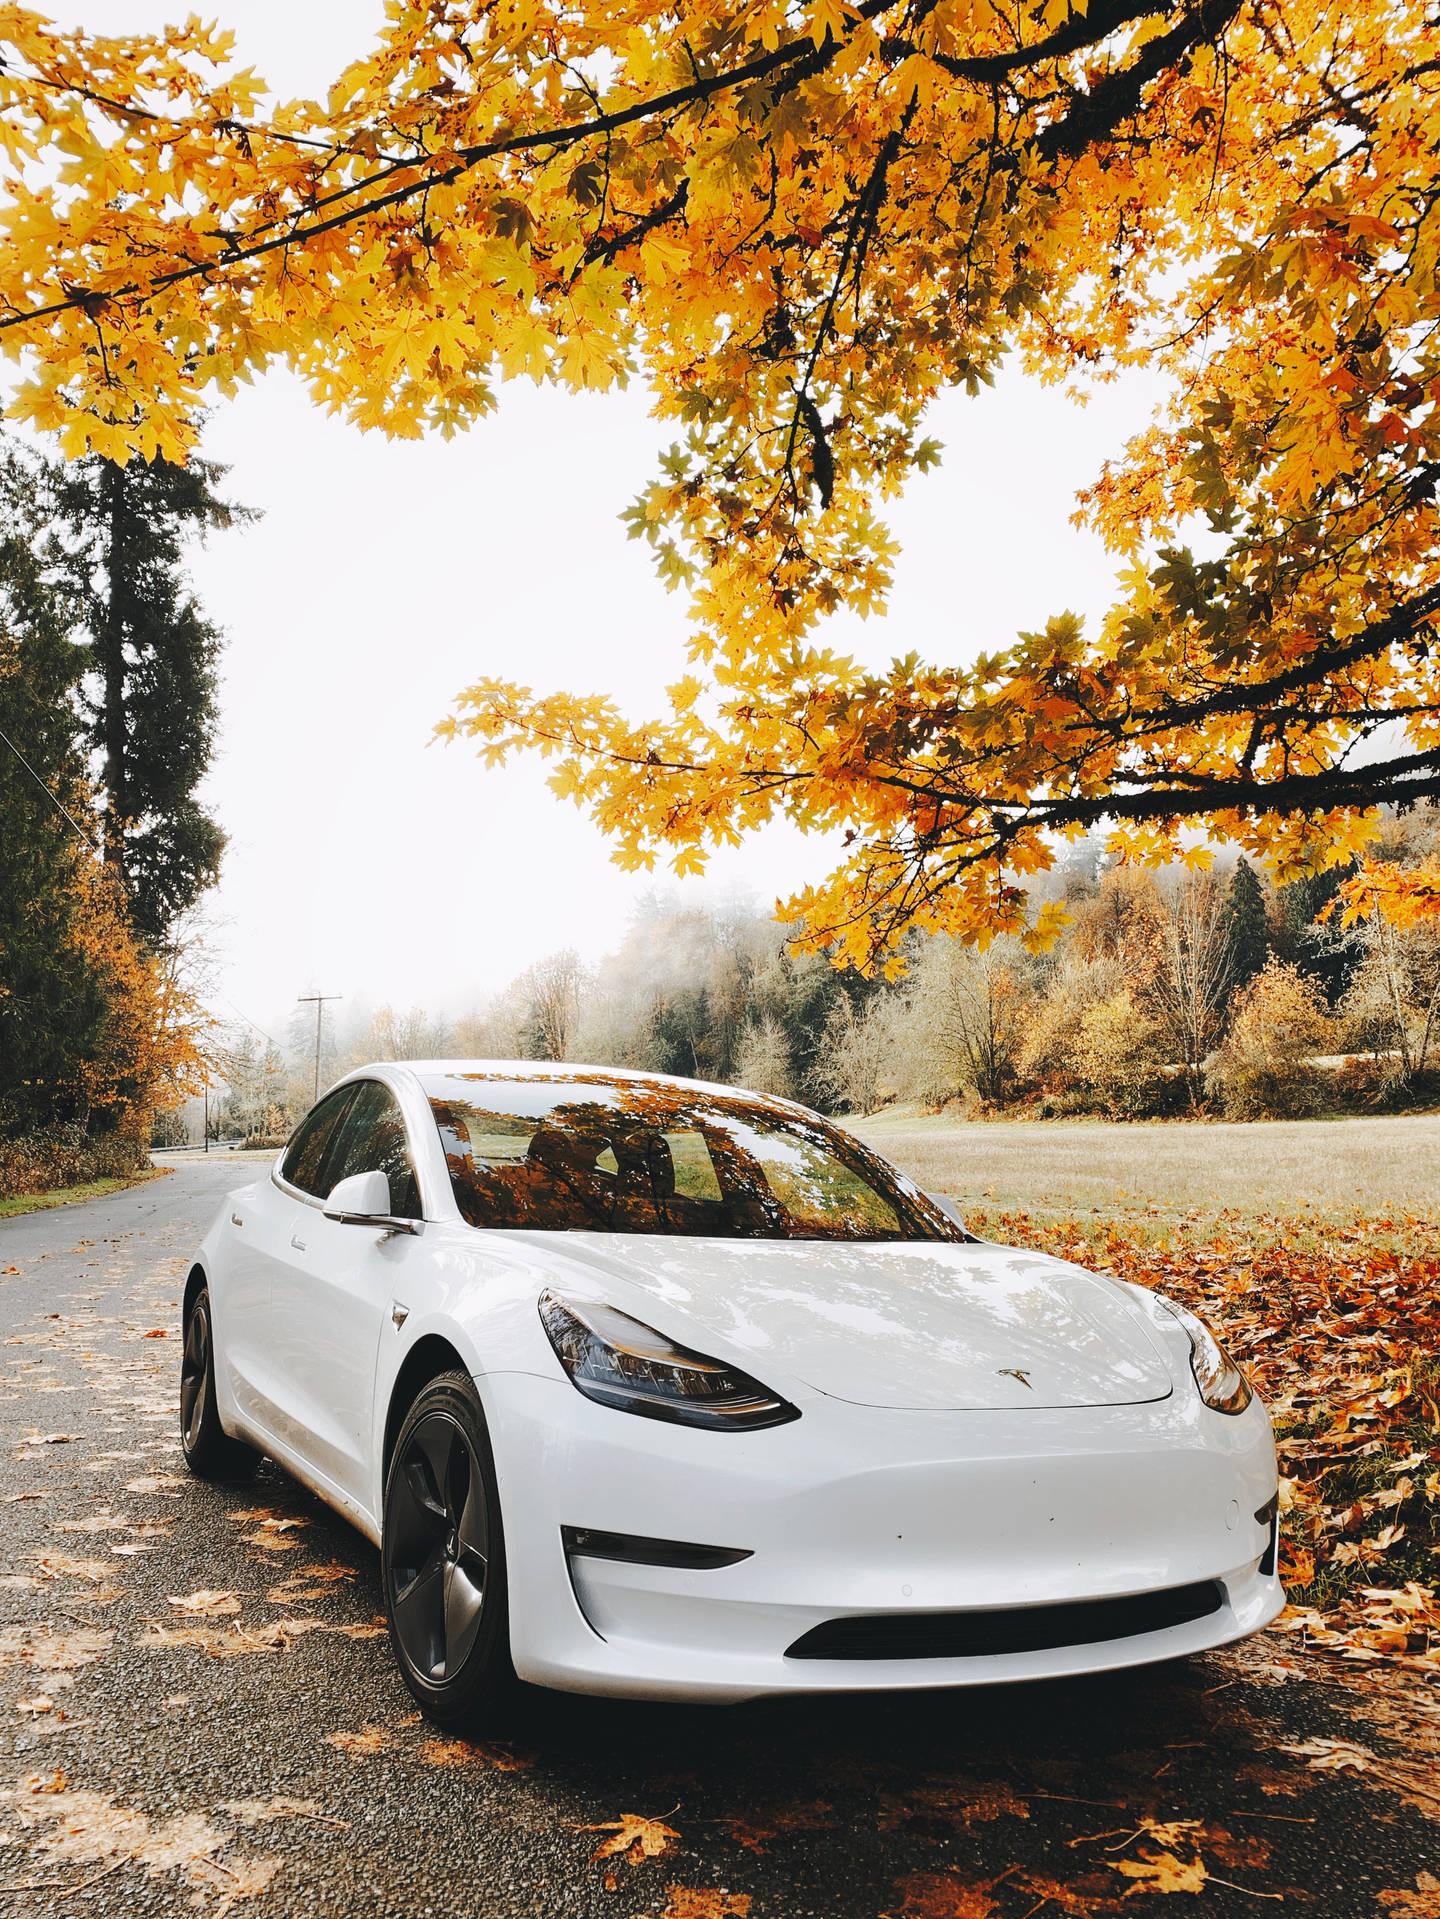 Turn Heads With The White Tesla Car This Autumn Wallpaper